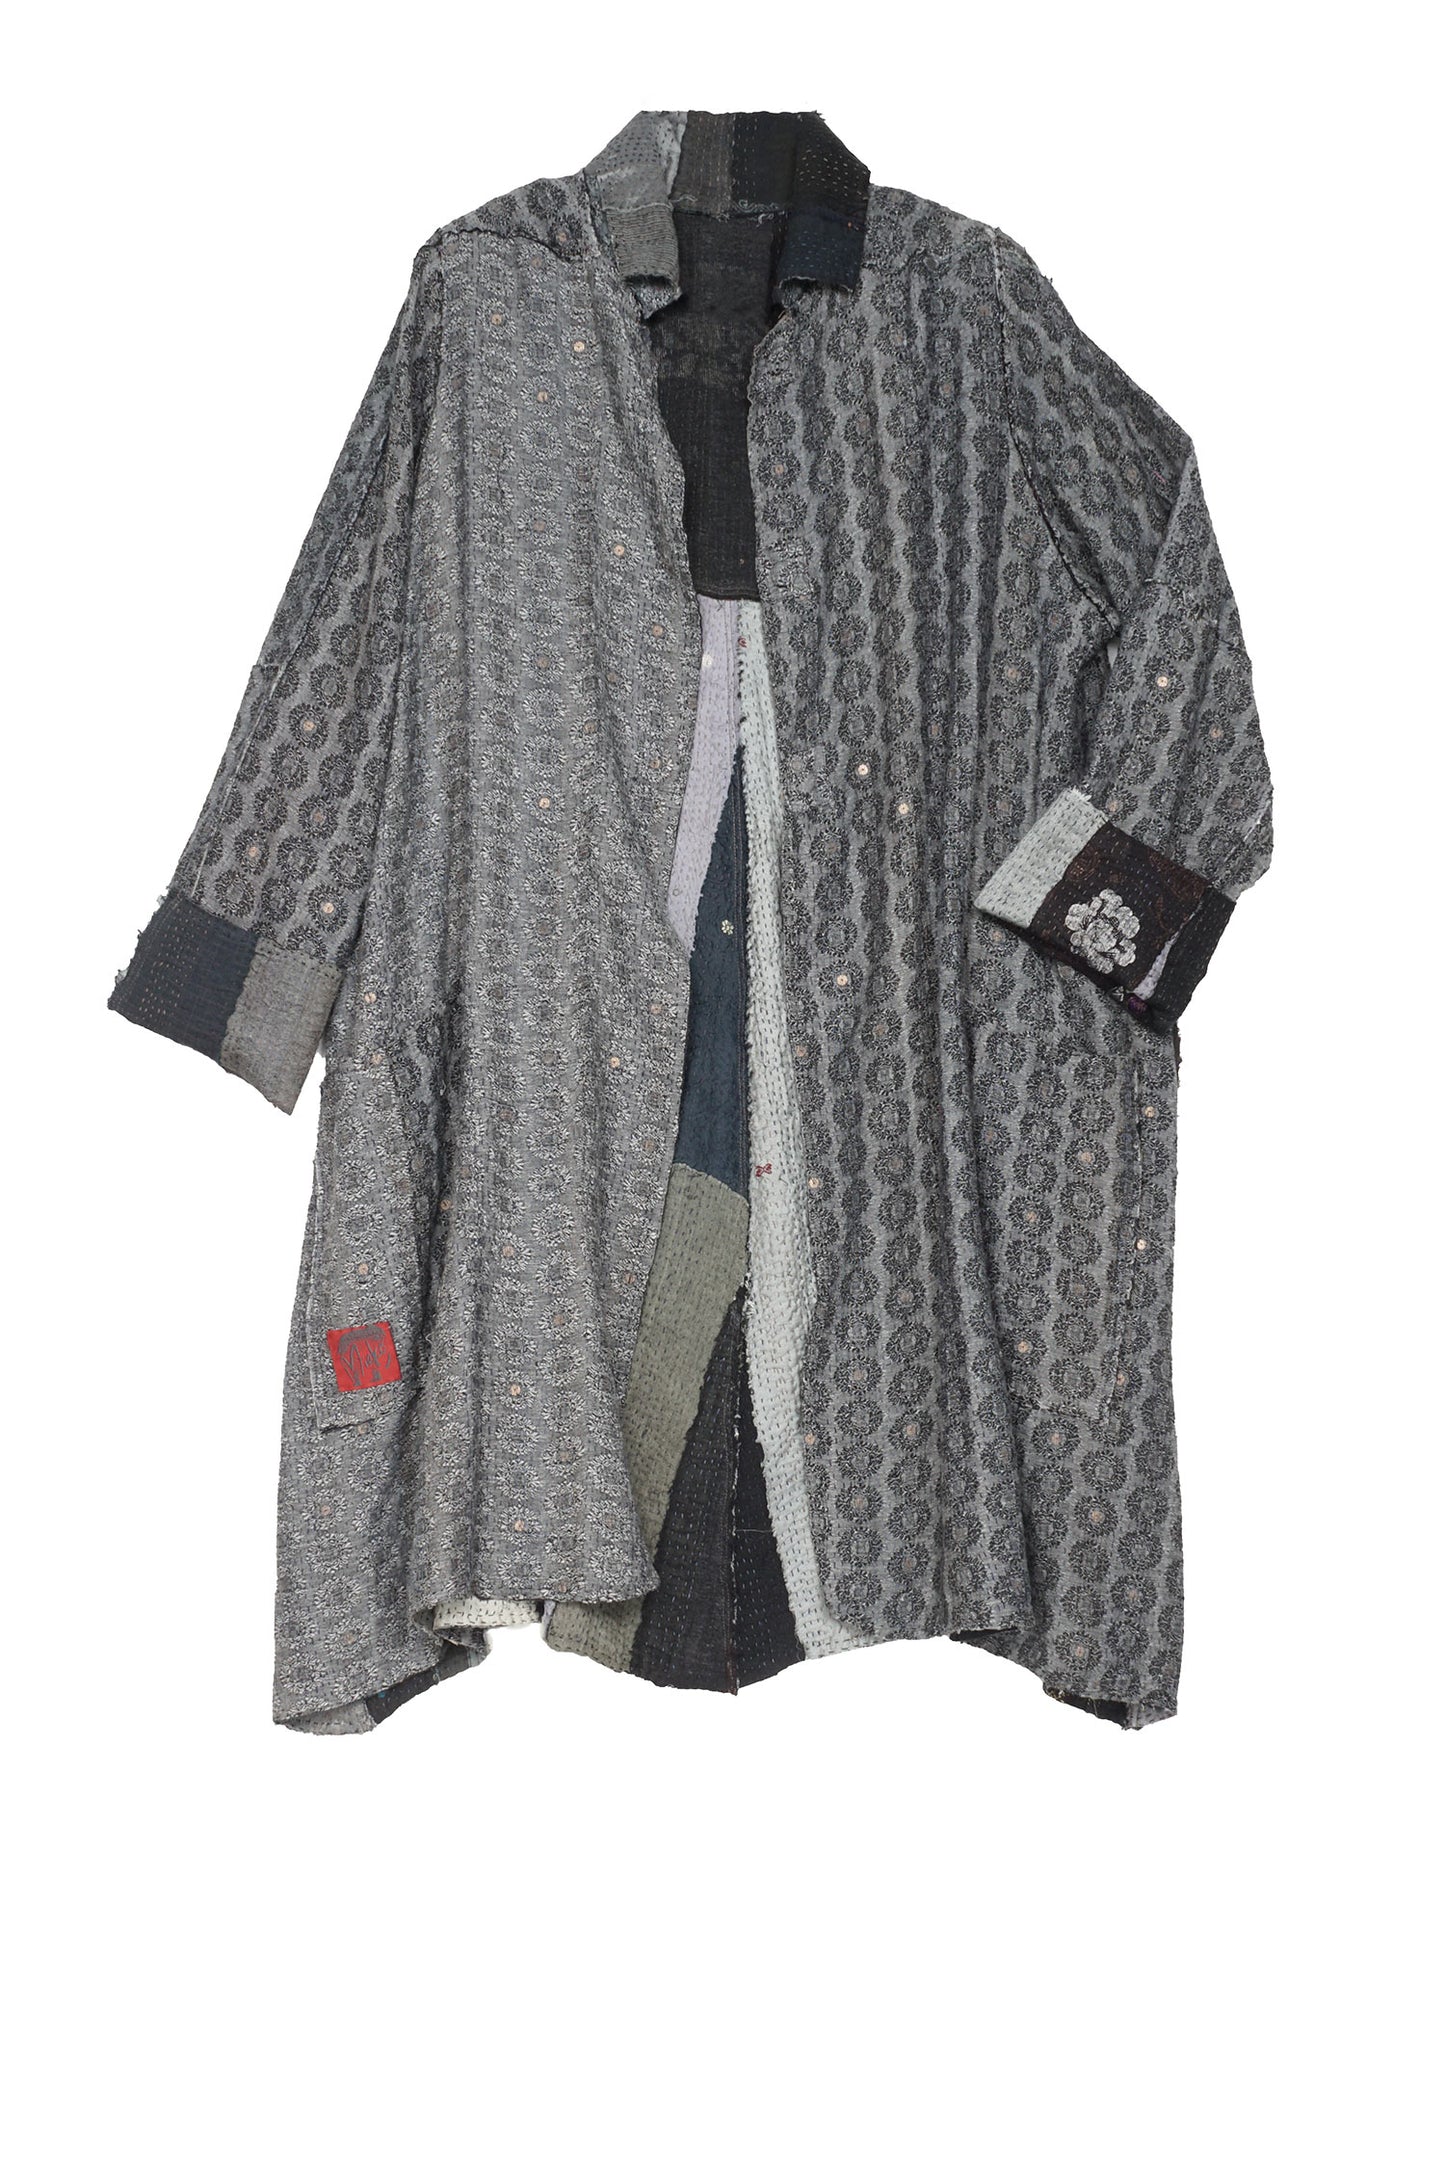 STRIPE FRAYED & HANDWOVEN KANTHA A-LINE DUSTER